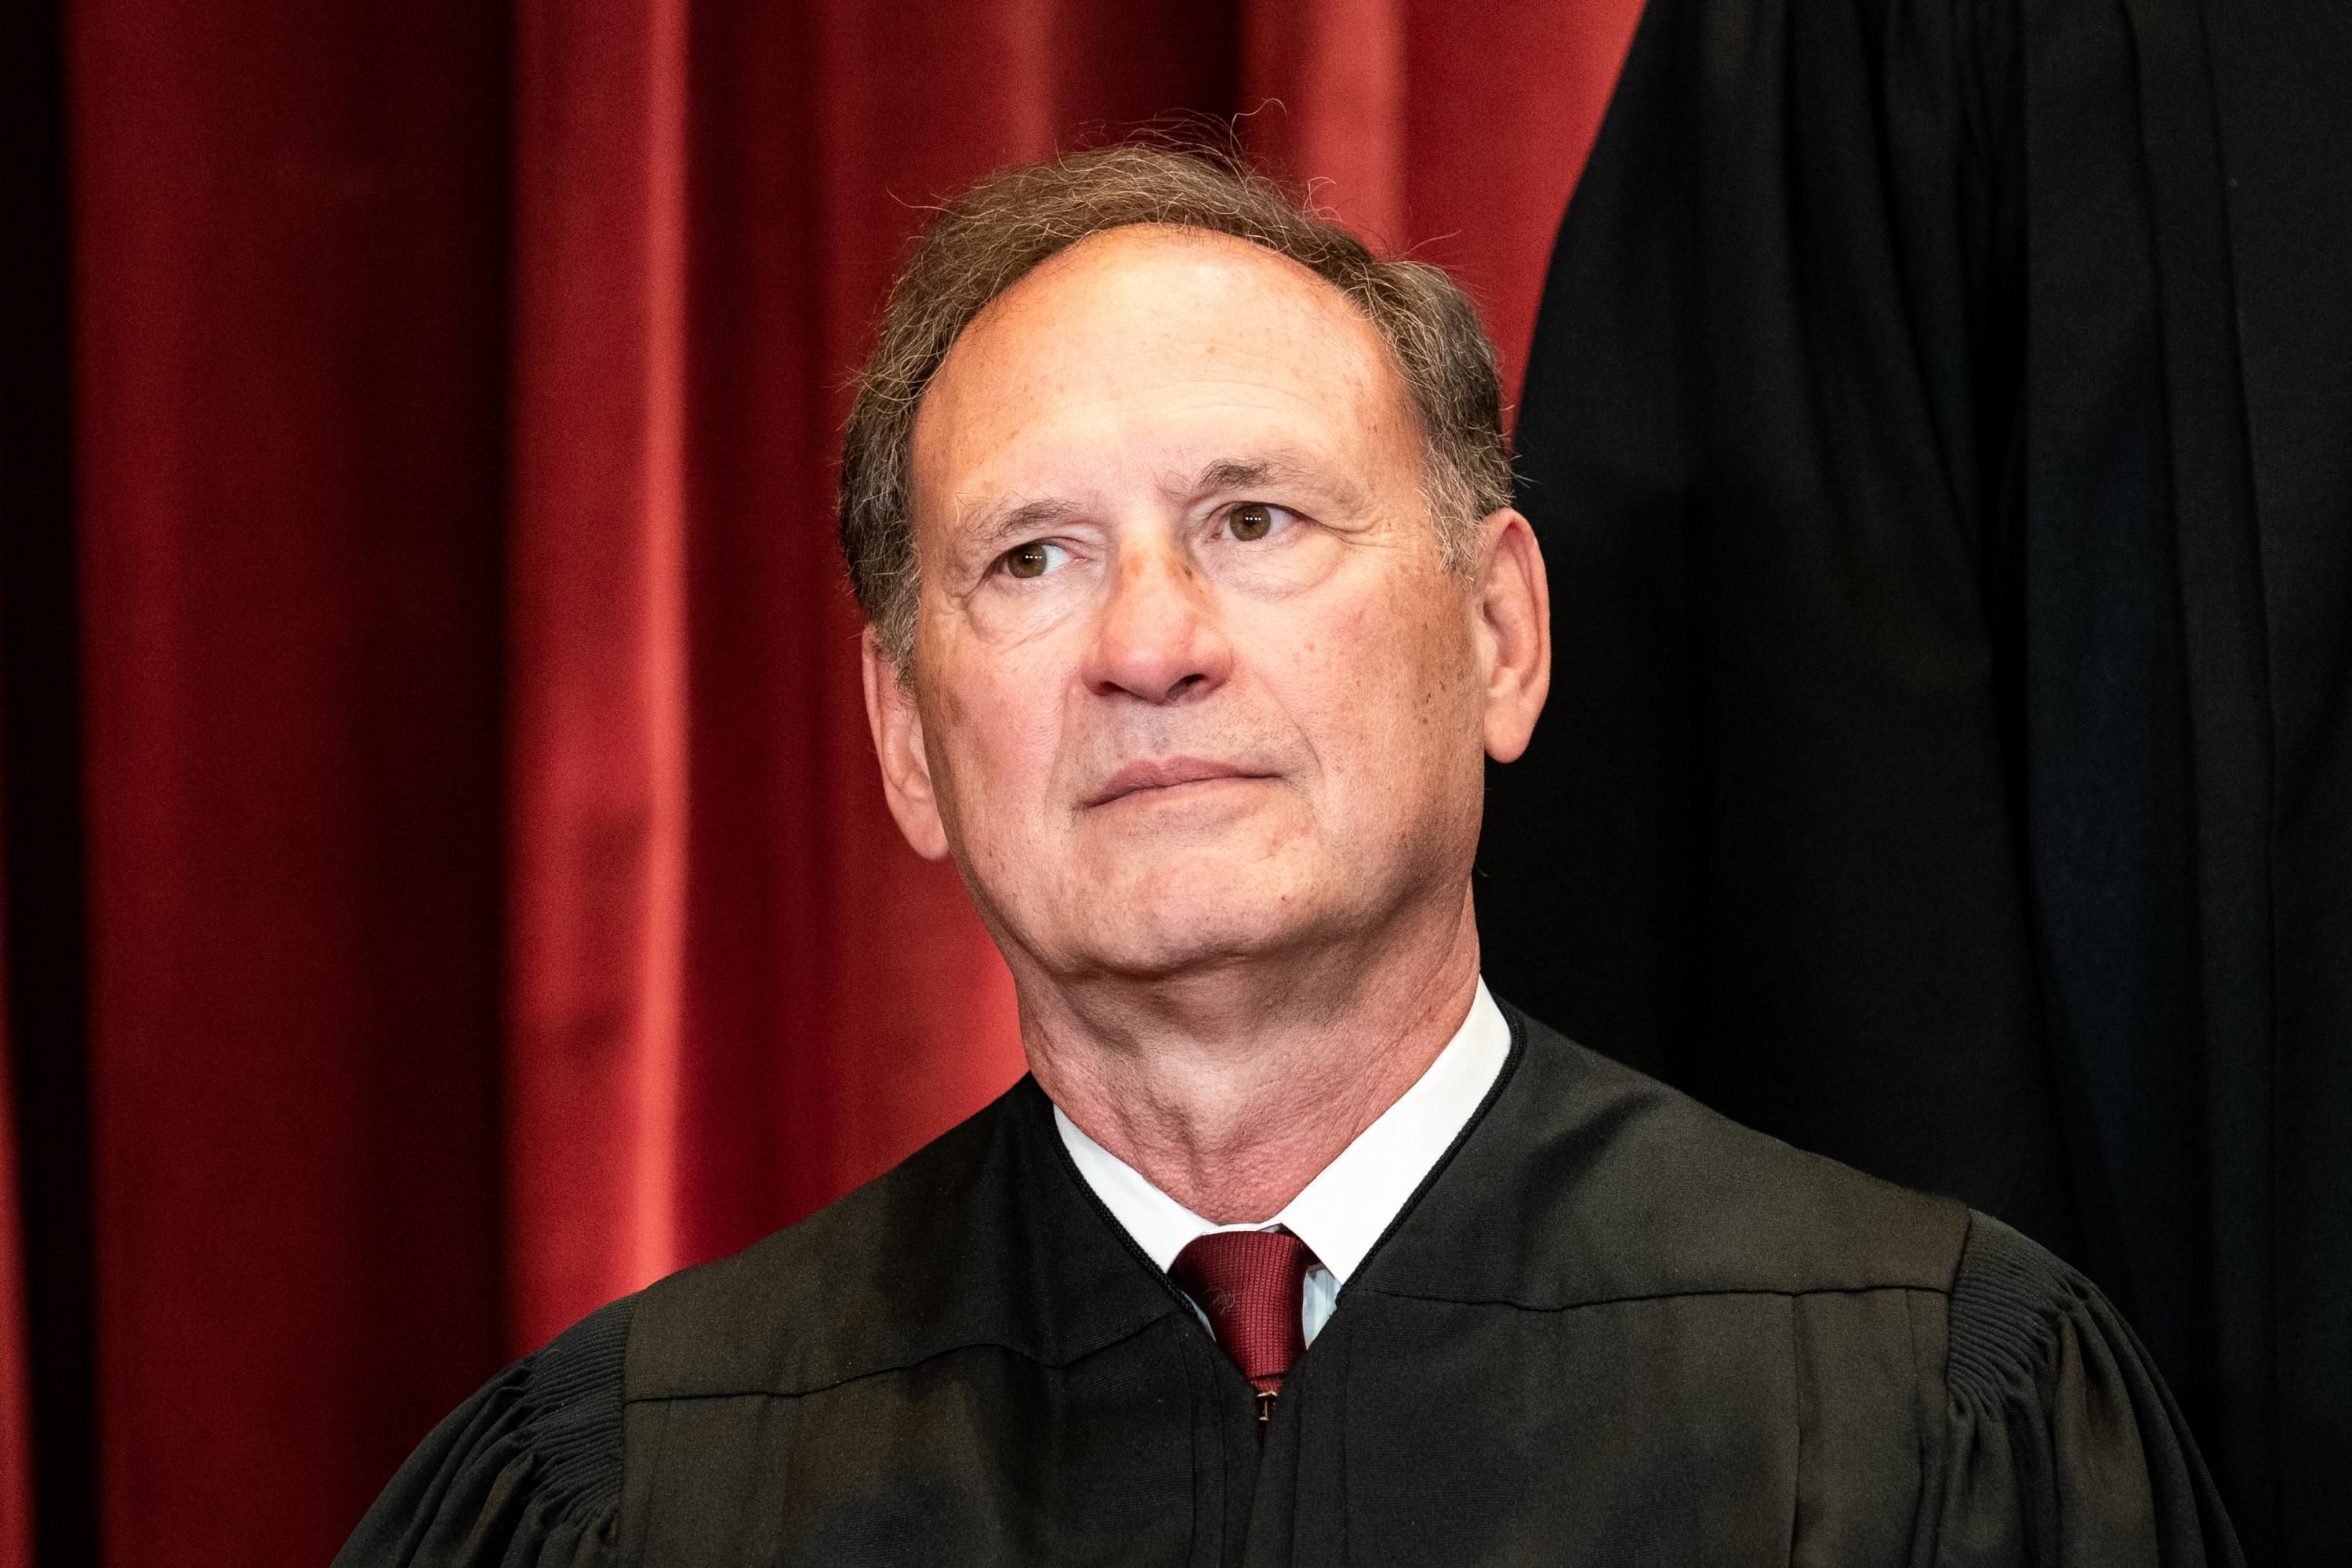 Supreme Court Justice Samuel Alito sits during a group photo